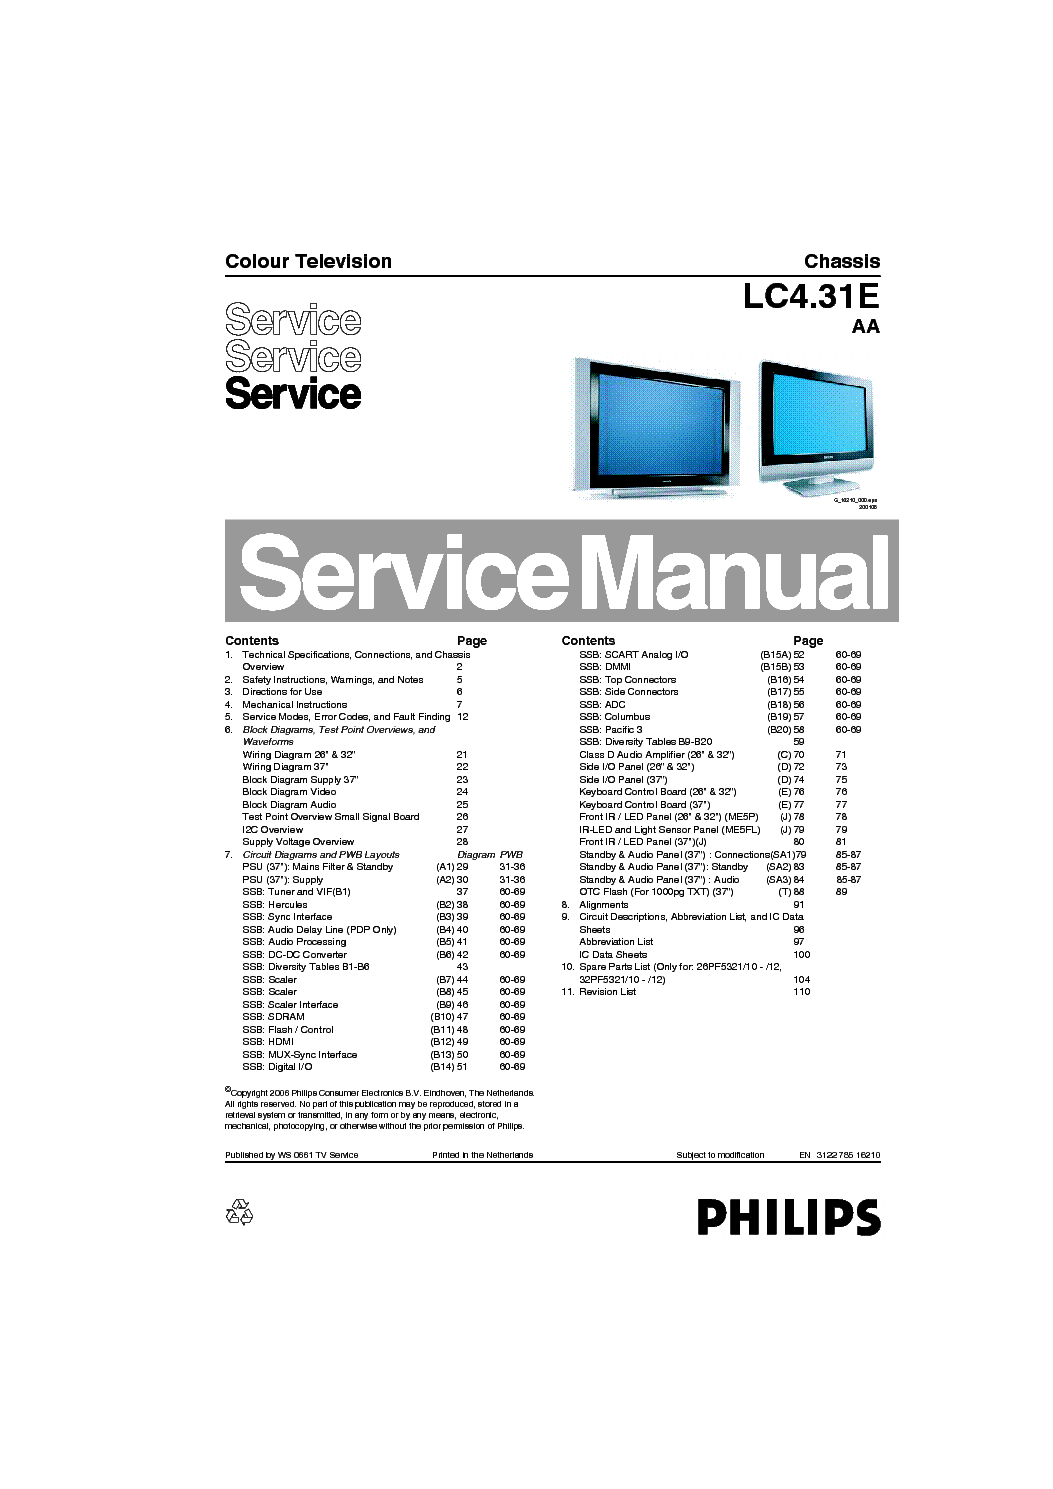 PHILIPS CHASSIS LC4.31E AA 312278516210 service manual (1st page)